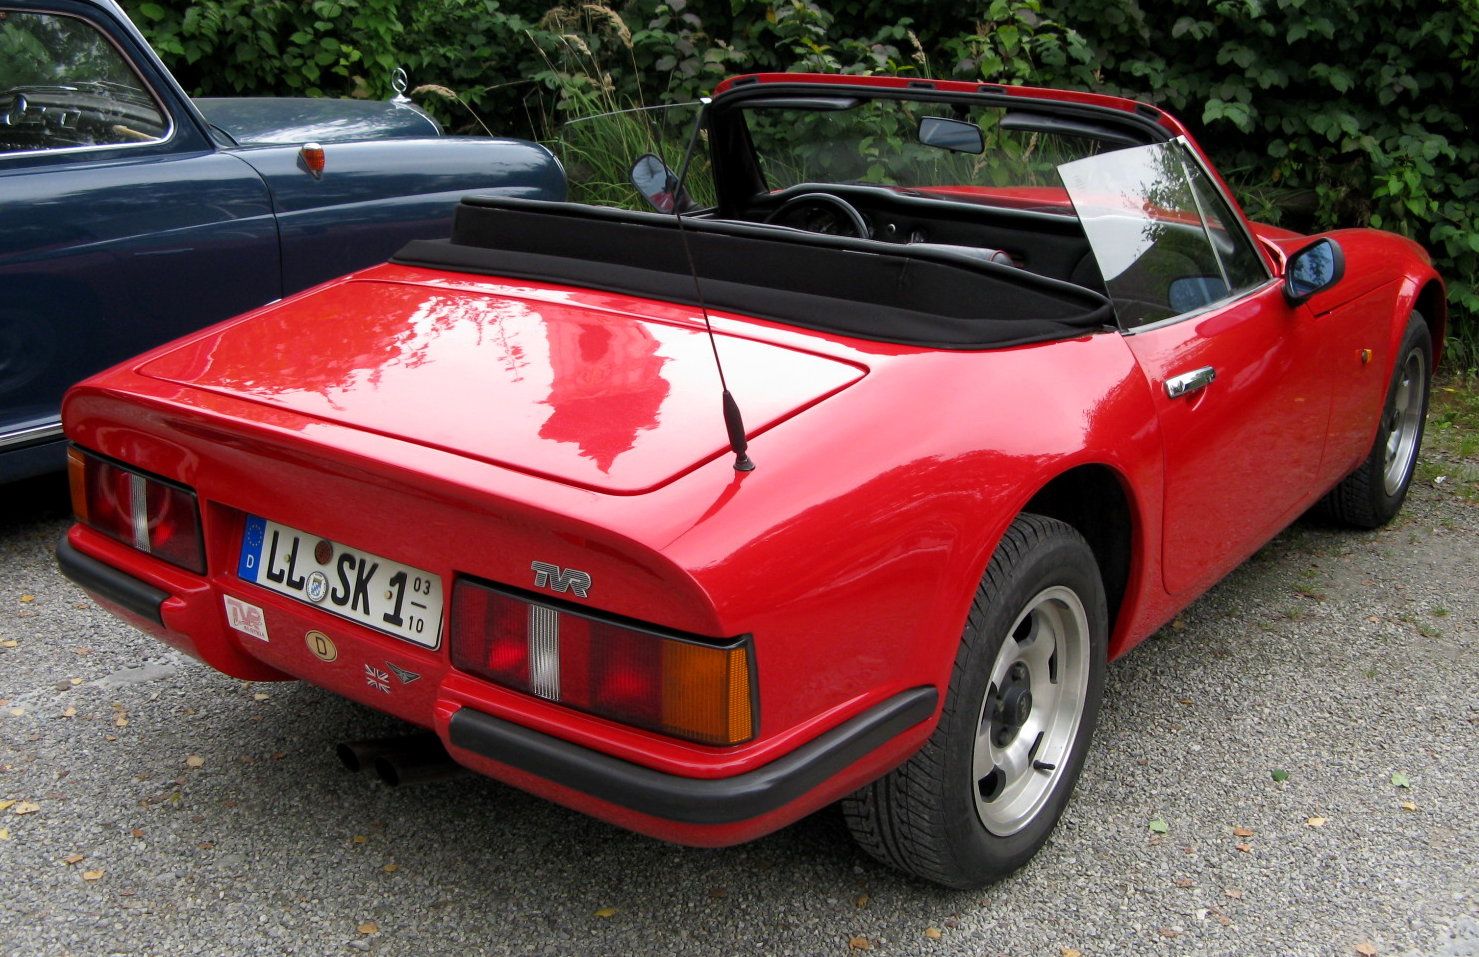 Red TVR S2 rear